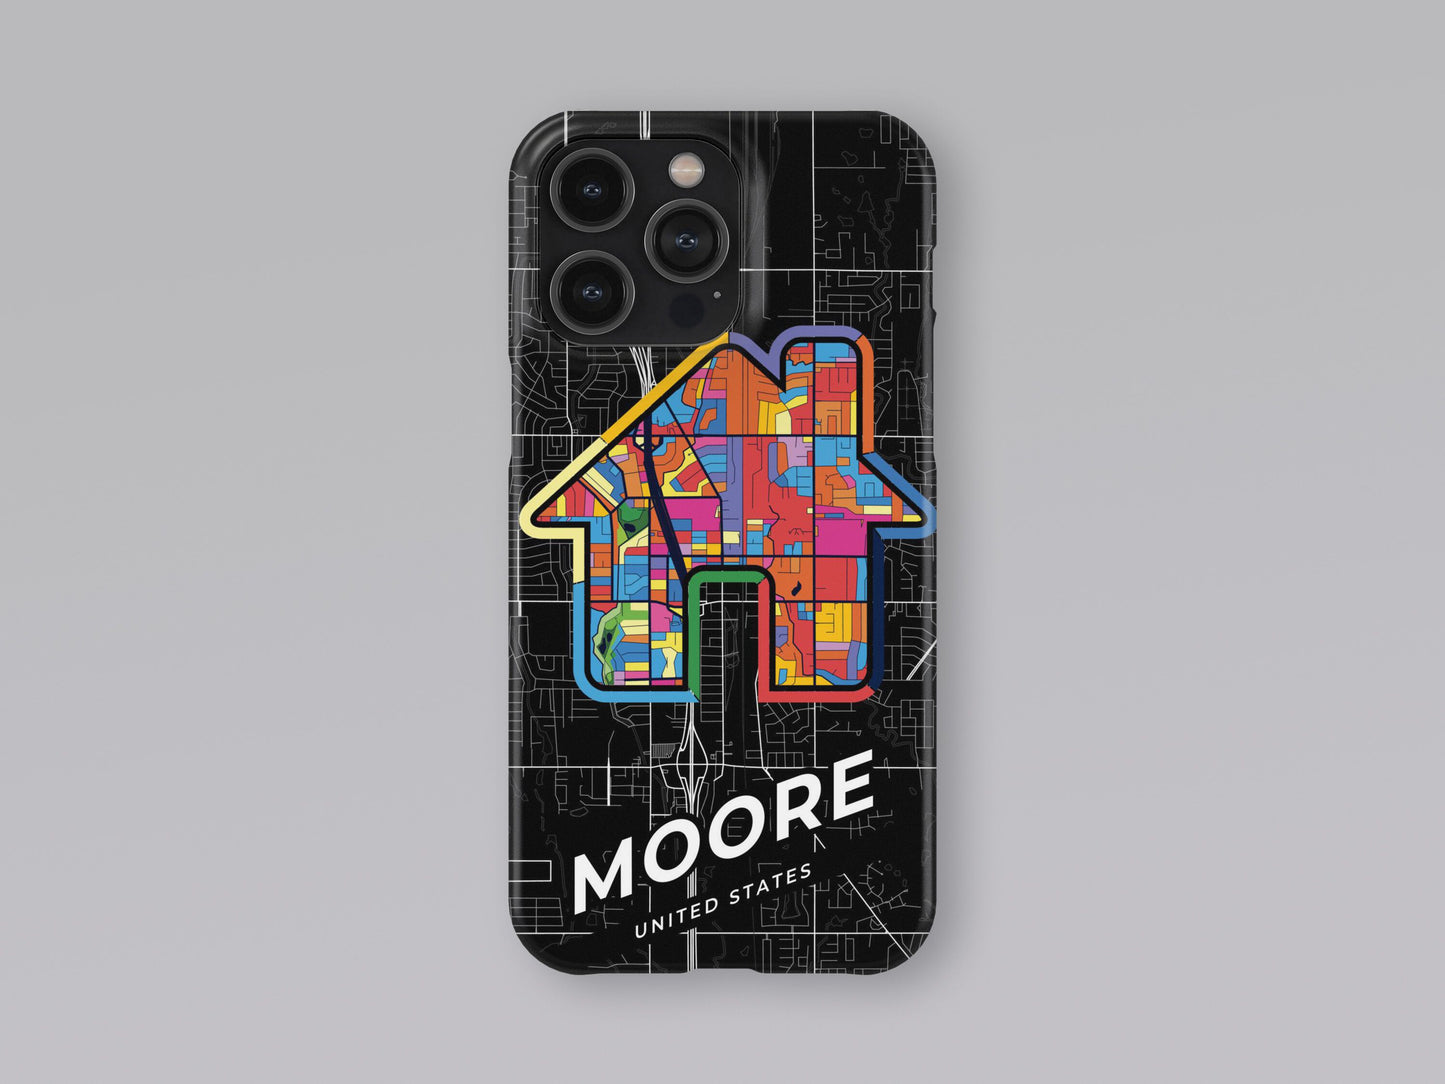 Moore Oklahoma slim phone case with colorful icon 3